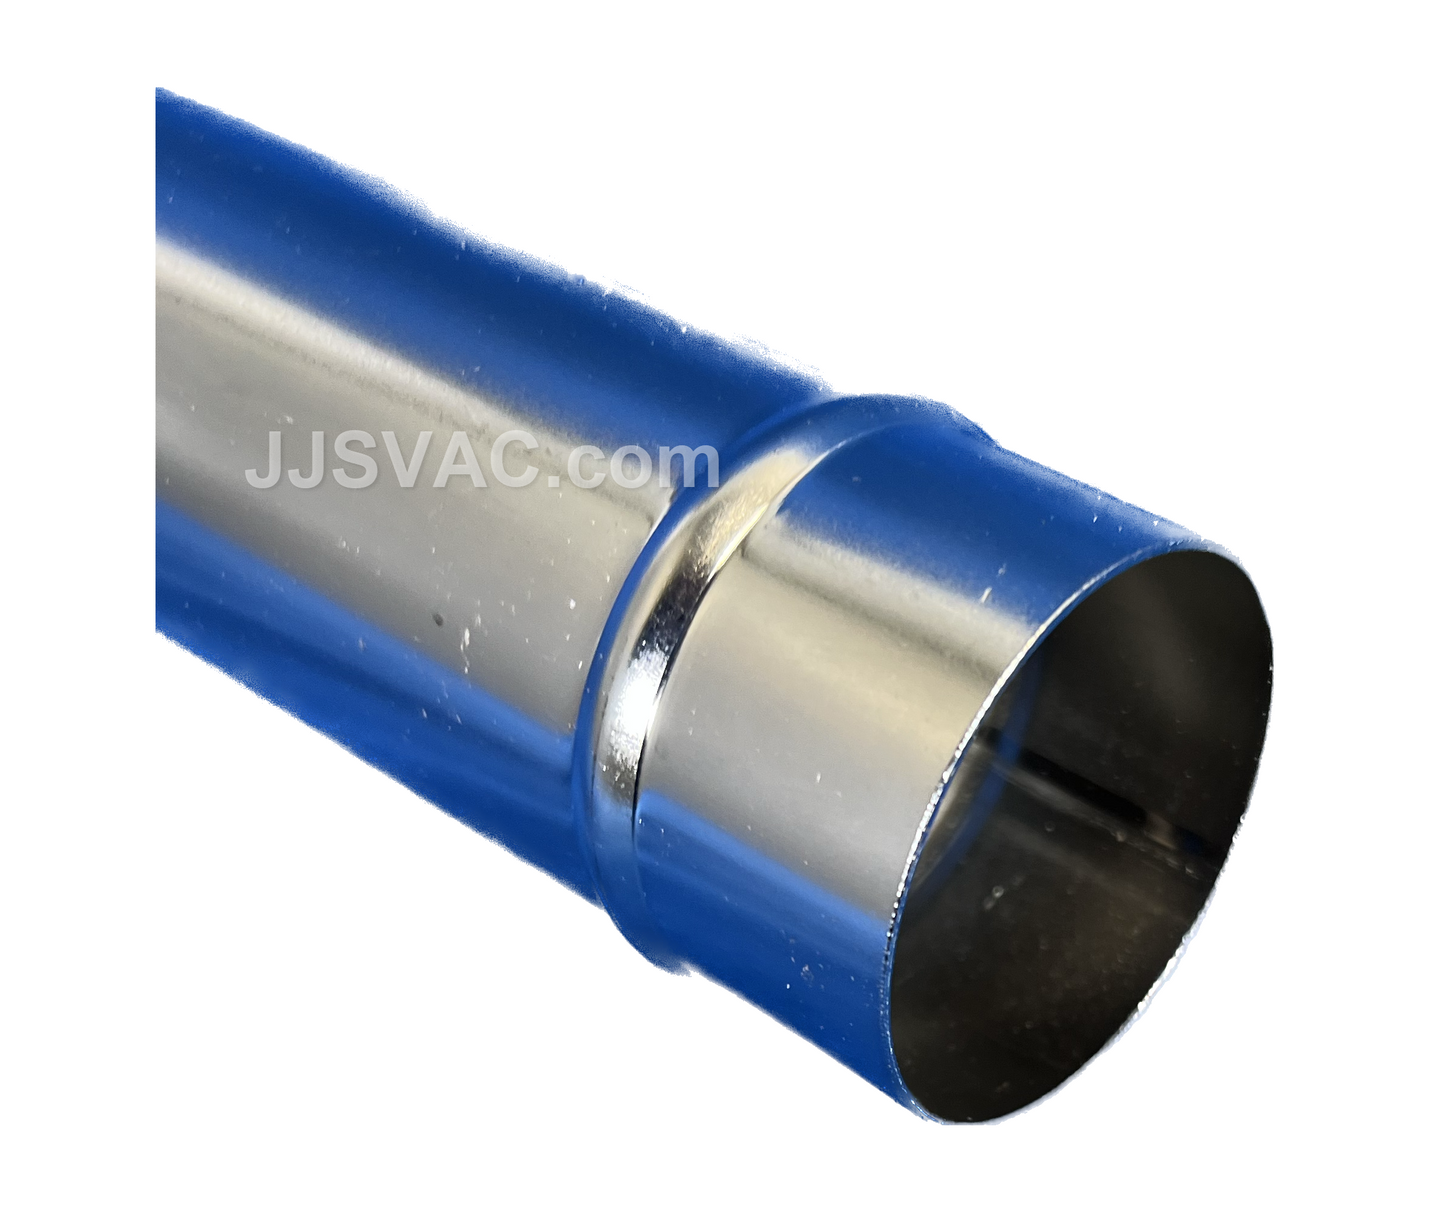 2" Vacuum Inlet Adapter - Connects 2" Hose Cuff with 2" Inlet Adapter - Flexaust HO20T